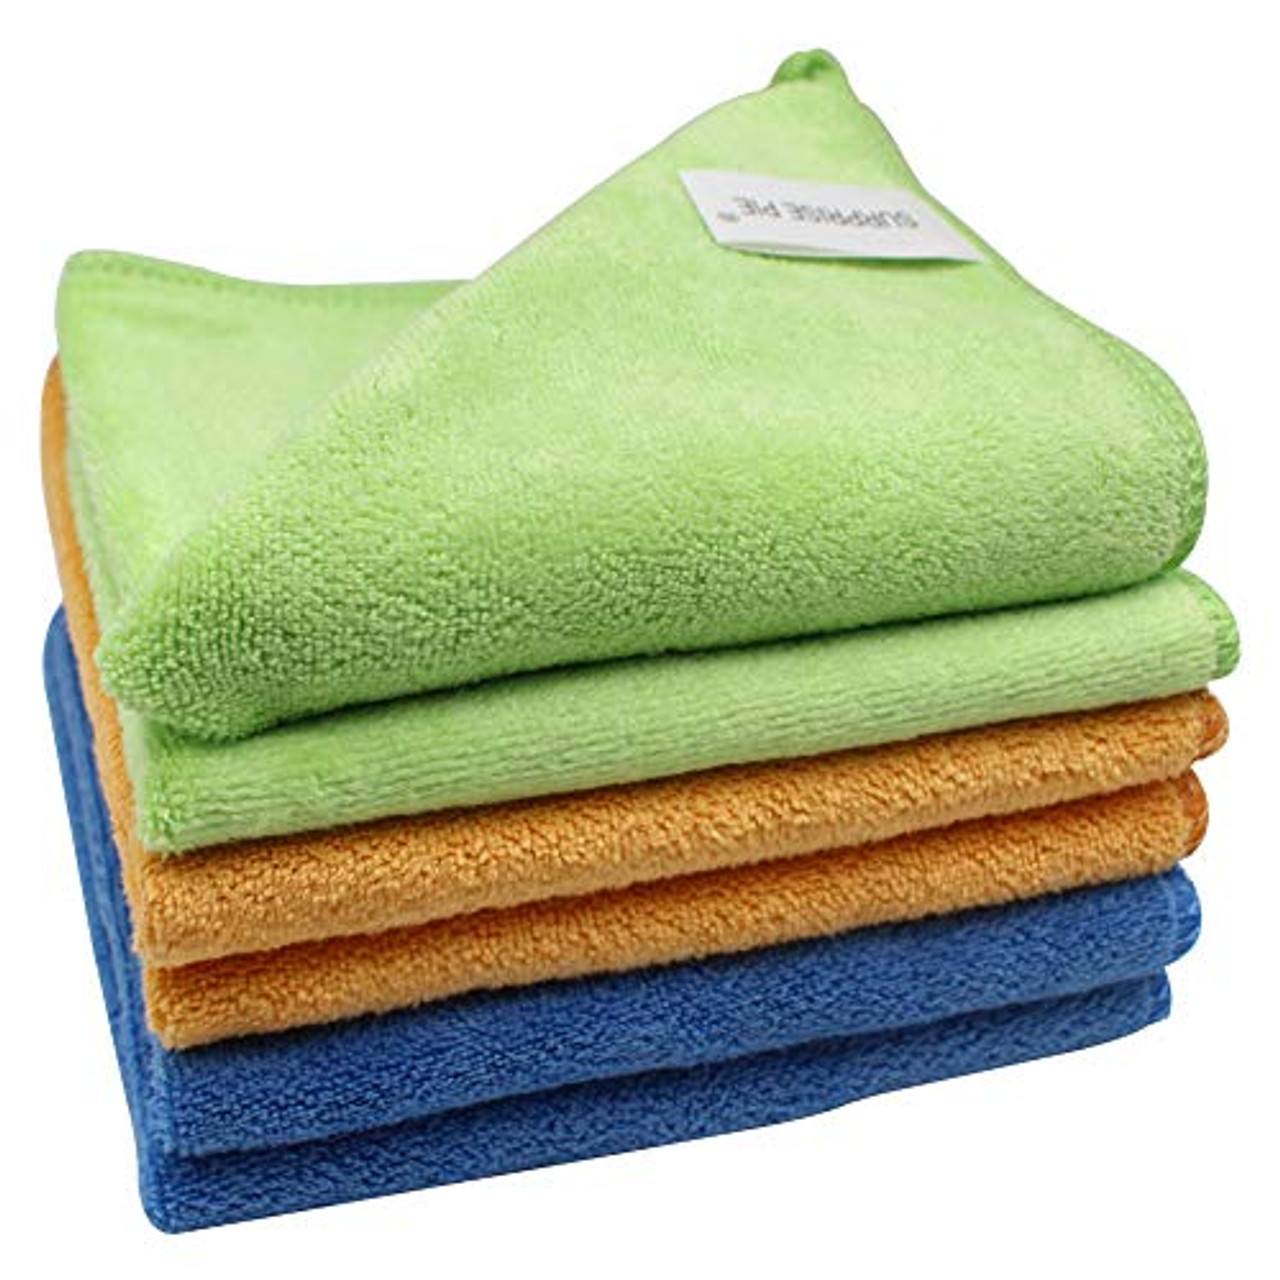 20 Pack Microfiber Cleaning Cloth, Cleaning Towels For